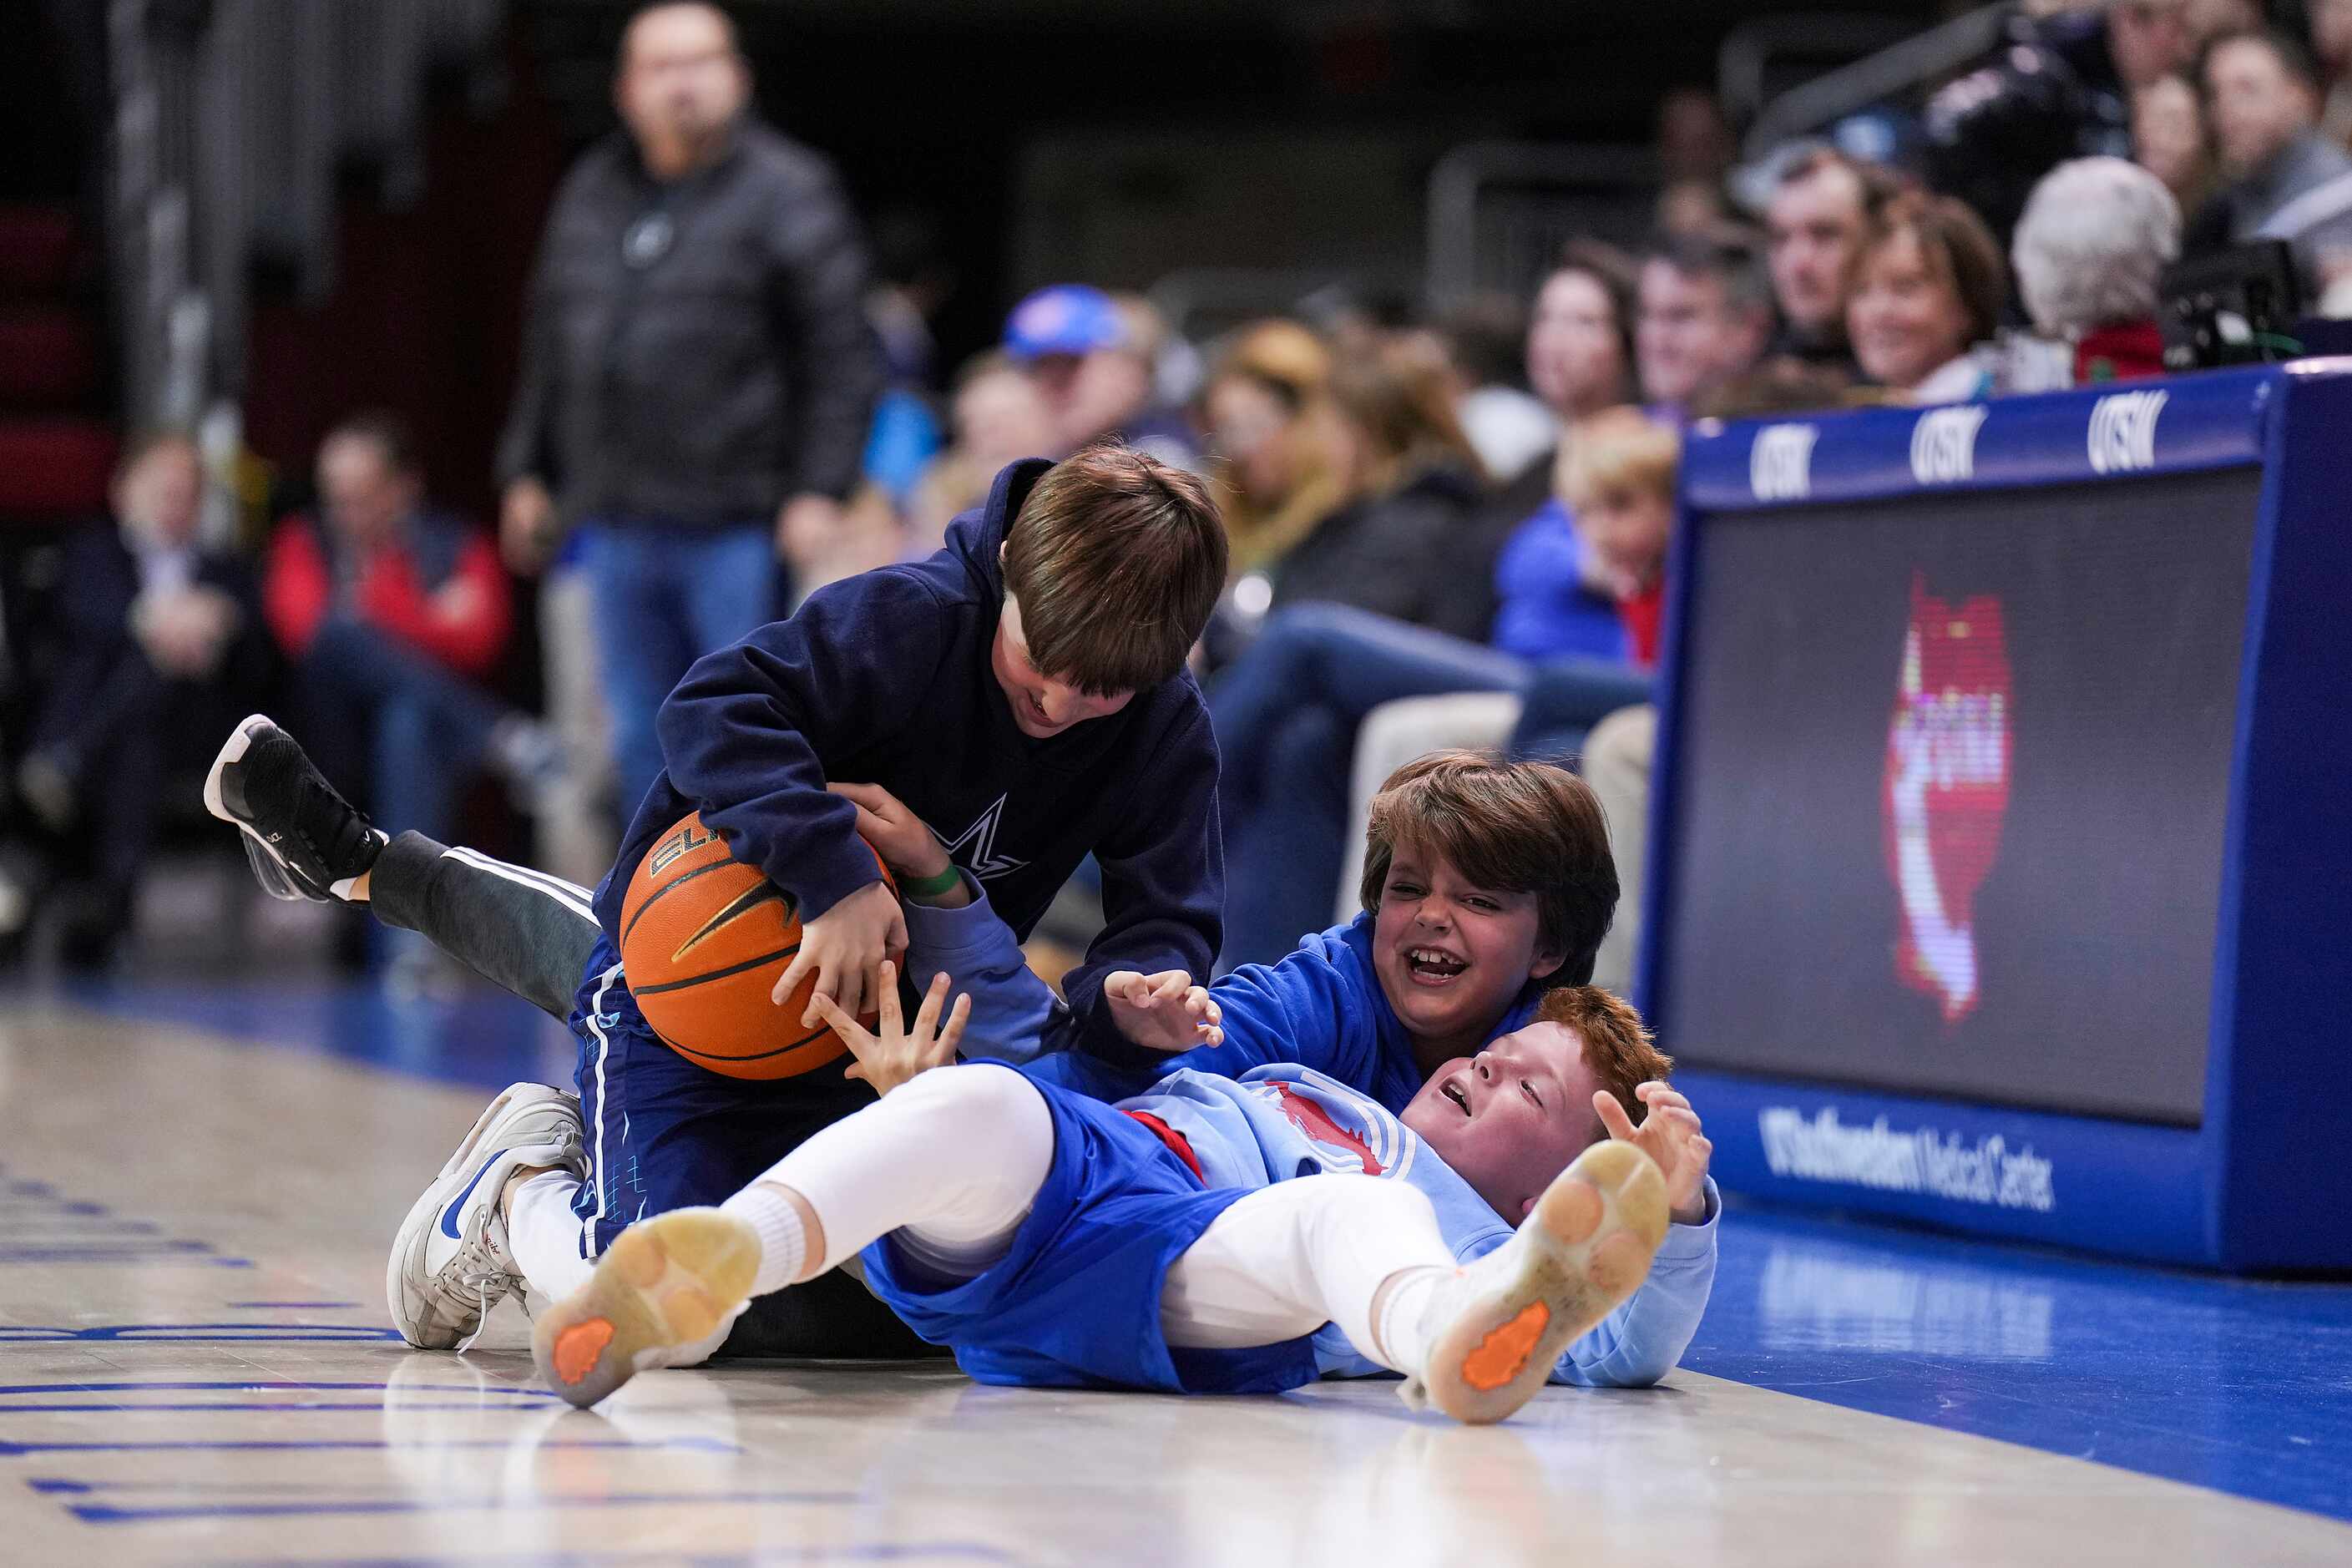 Young fans wrestle for a ball on the court during a timeout in an NCAA men’s basketball game...